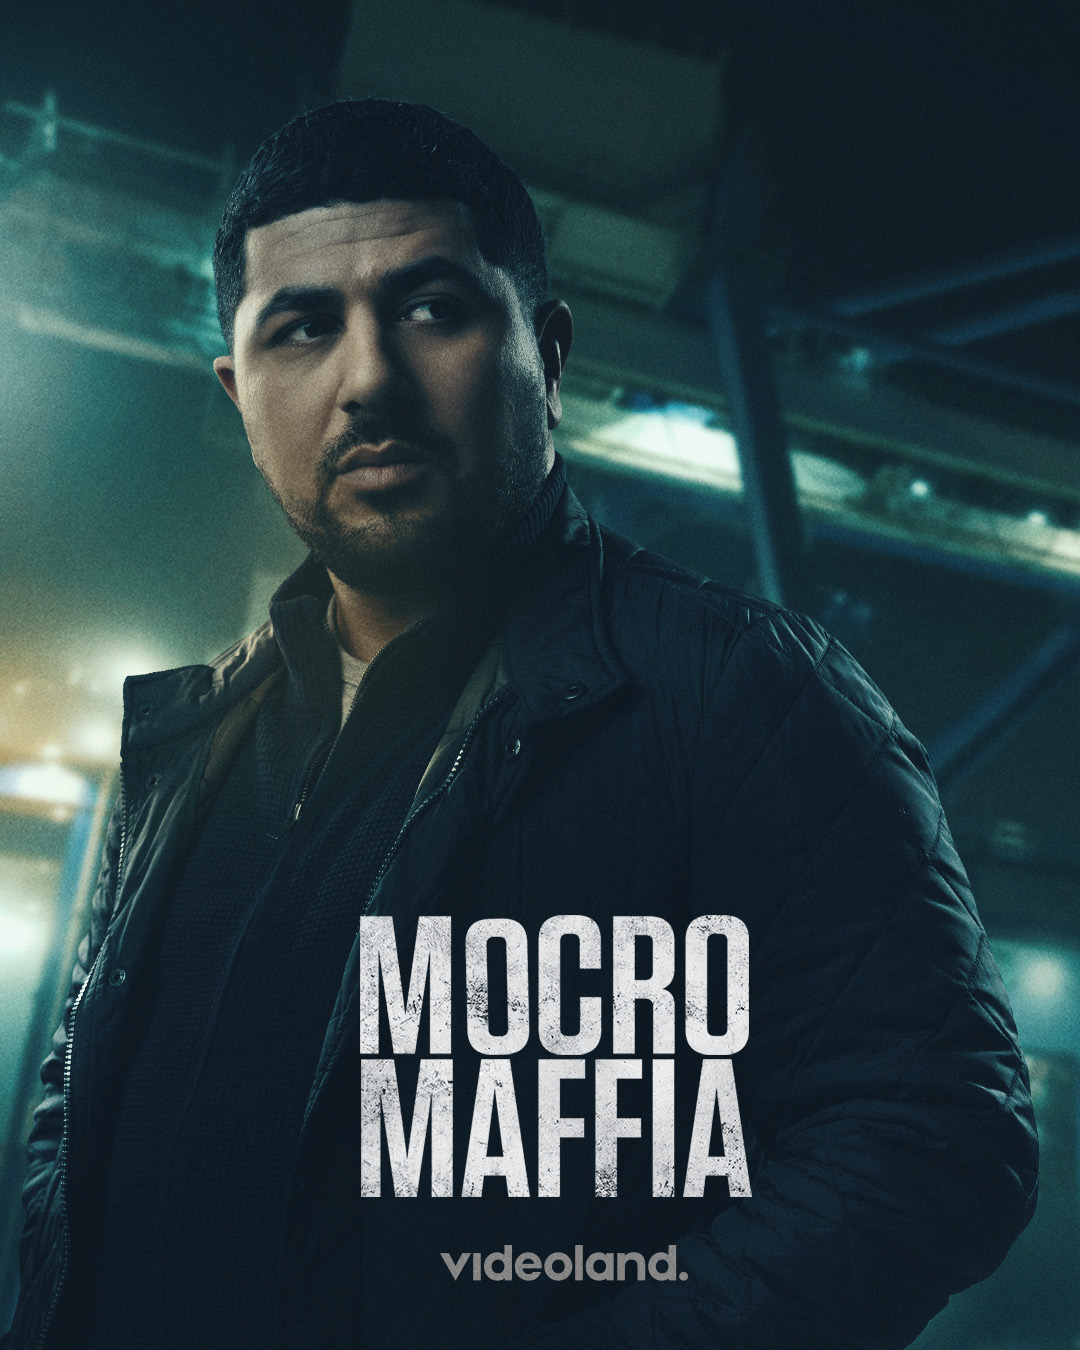 Extra Large TV Poster Image for Mocro maffia (#10 of 11)